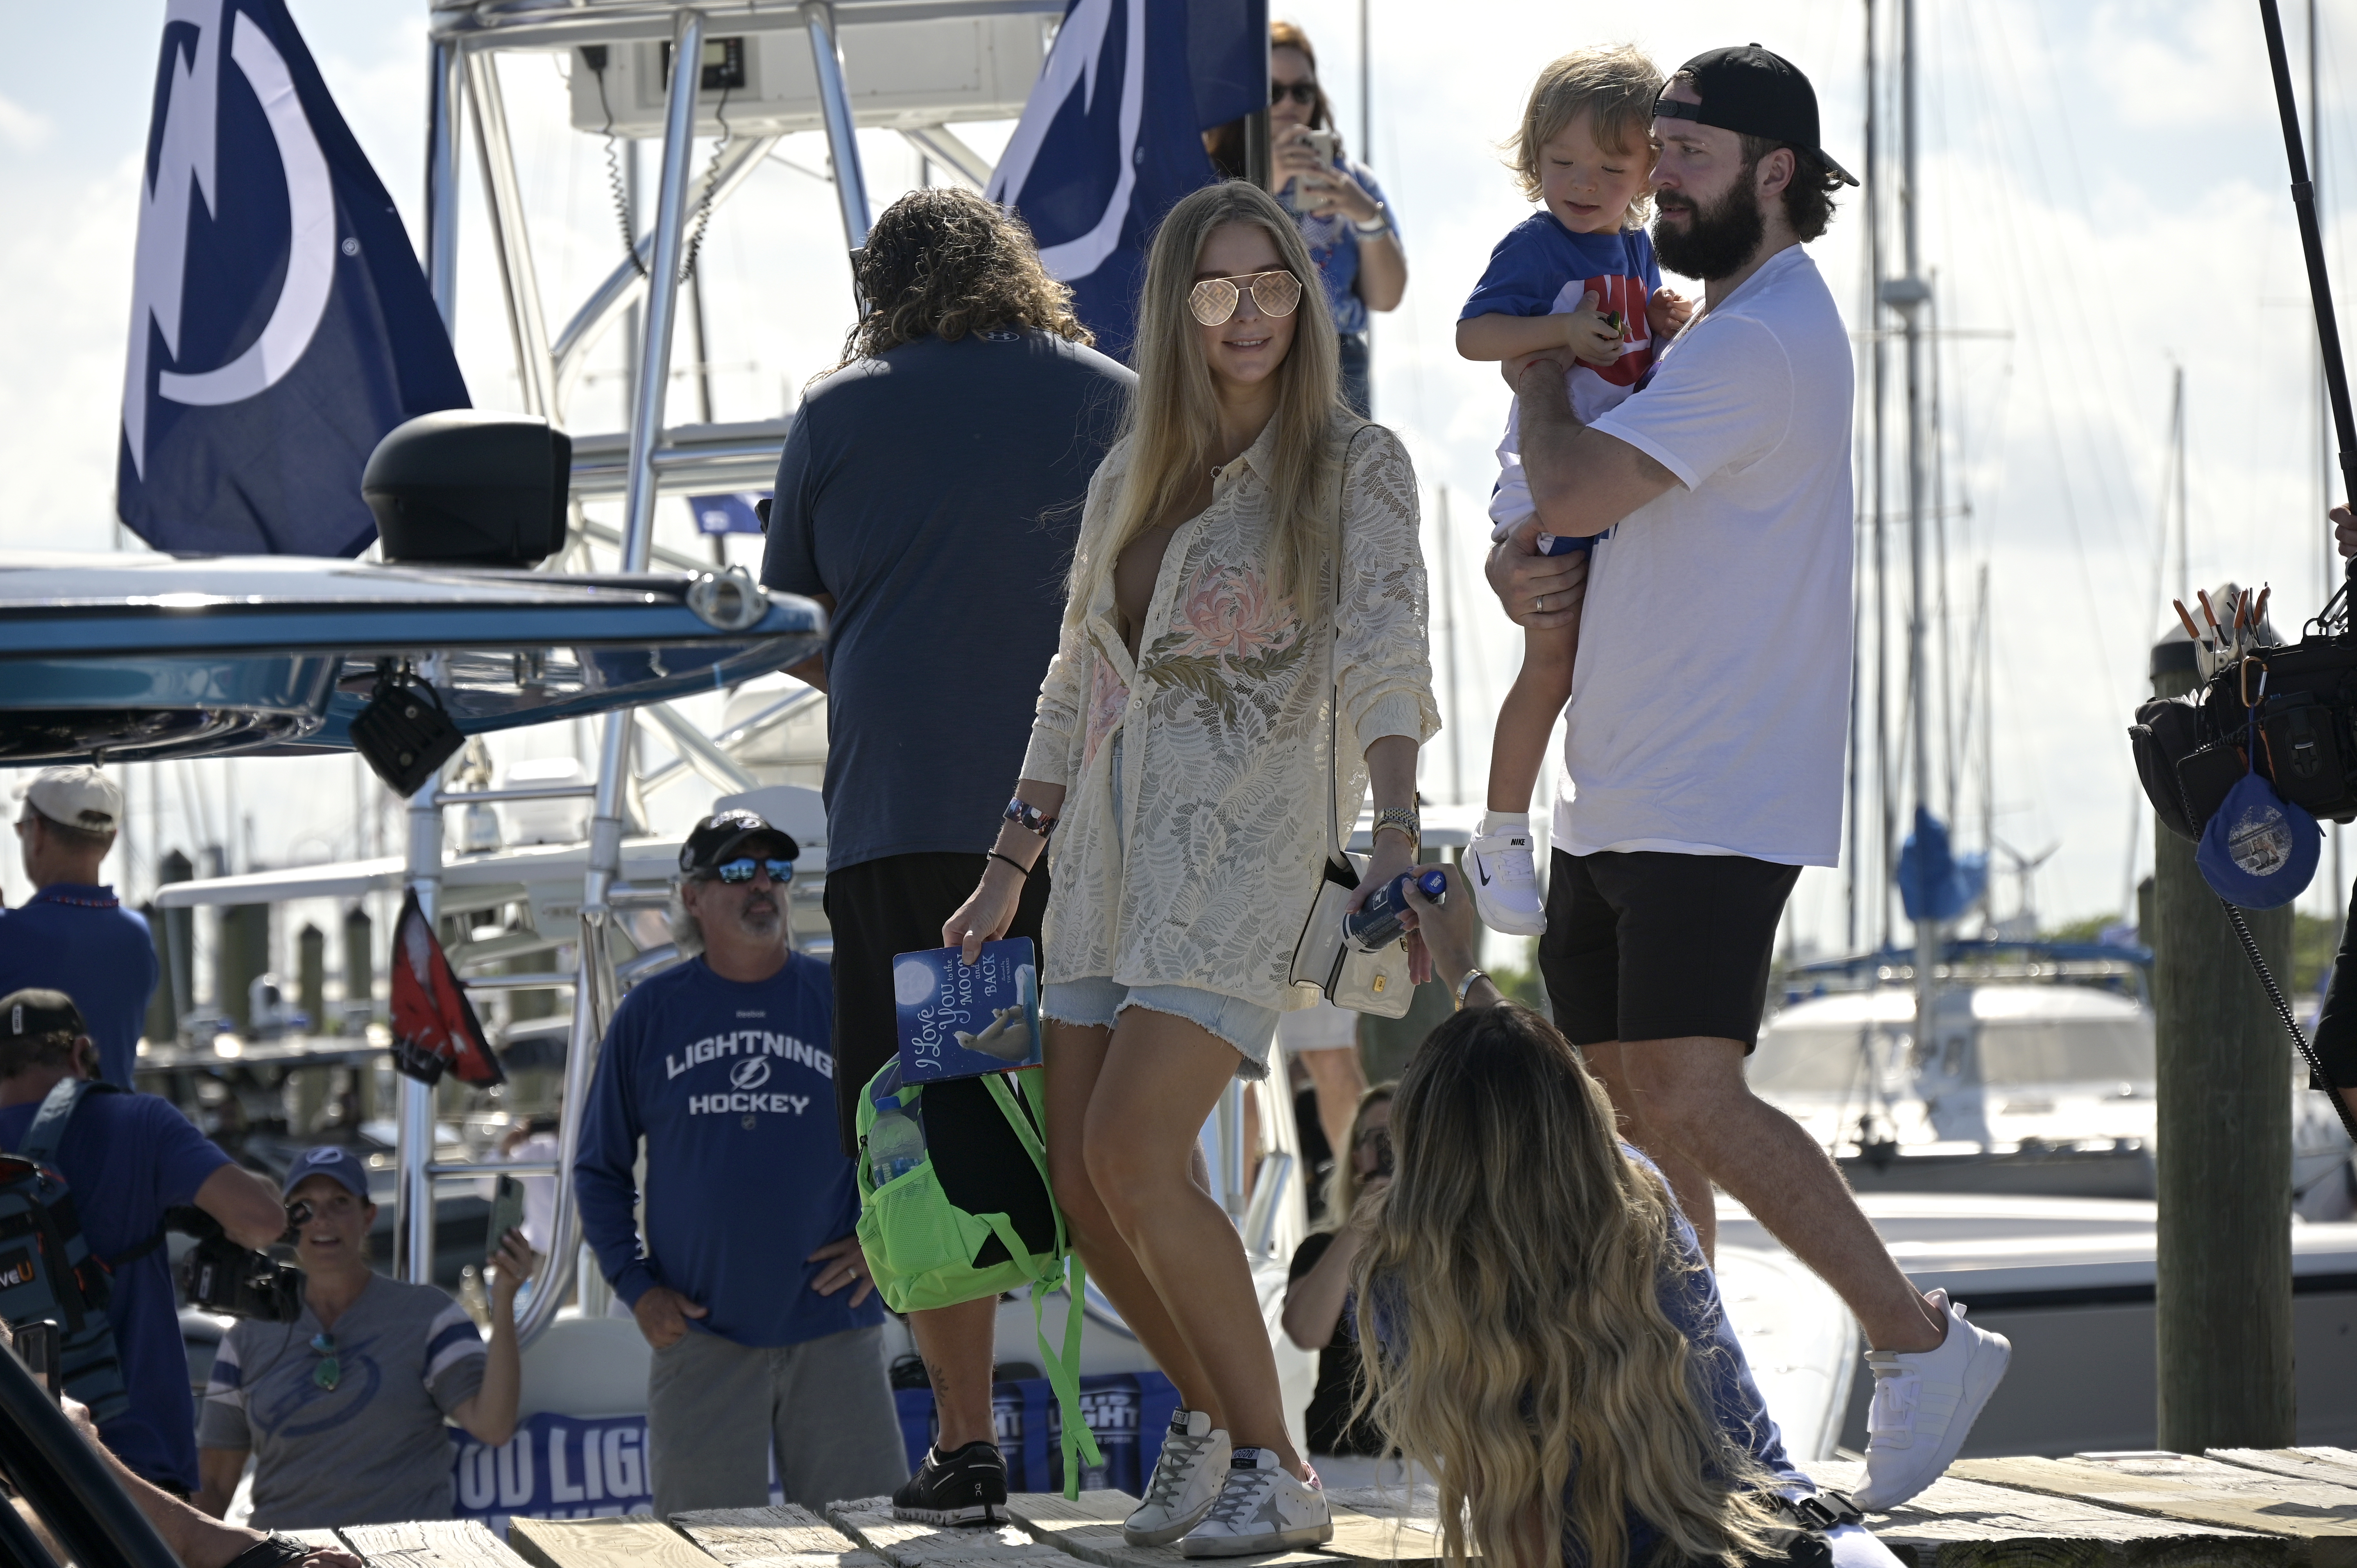 Nikita carries his son Max while walking with his wife Anastasiya before the NHL hockey Stanley Cup champions' Boat Parade, Monday, July 12, 2021, in Tampa, Florida